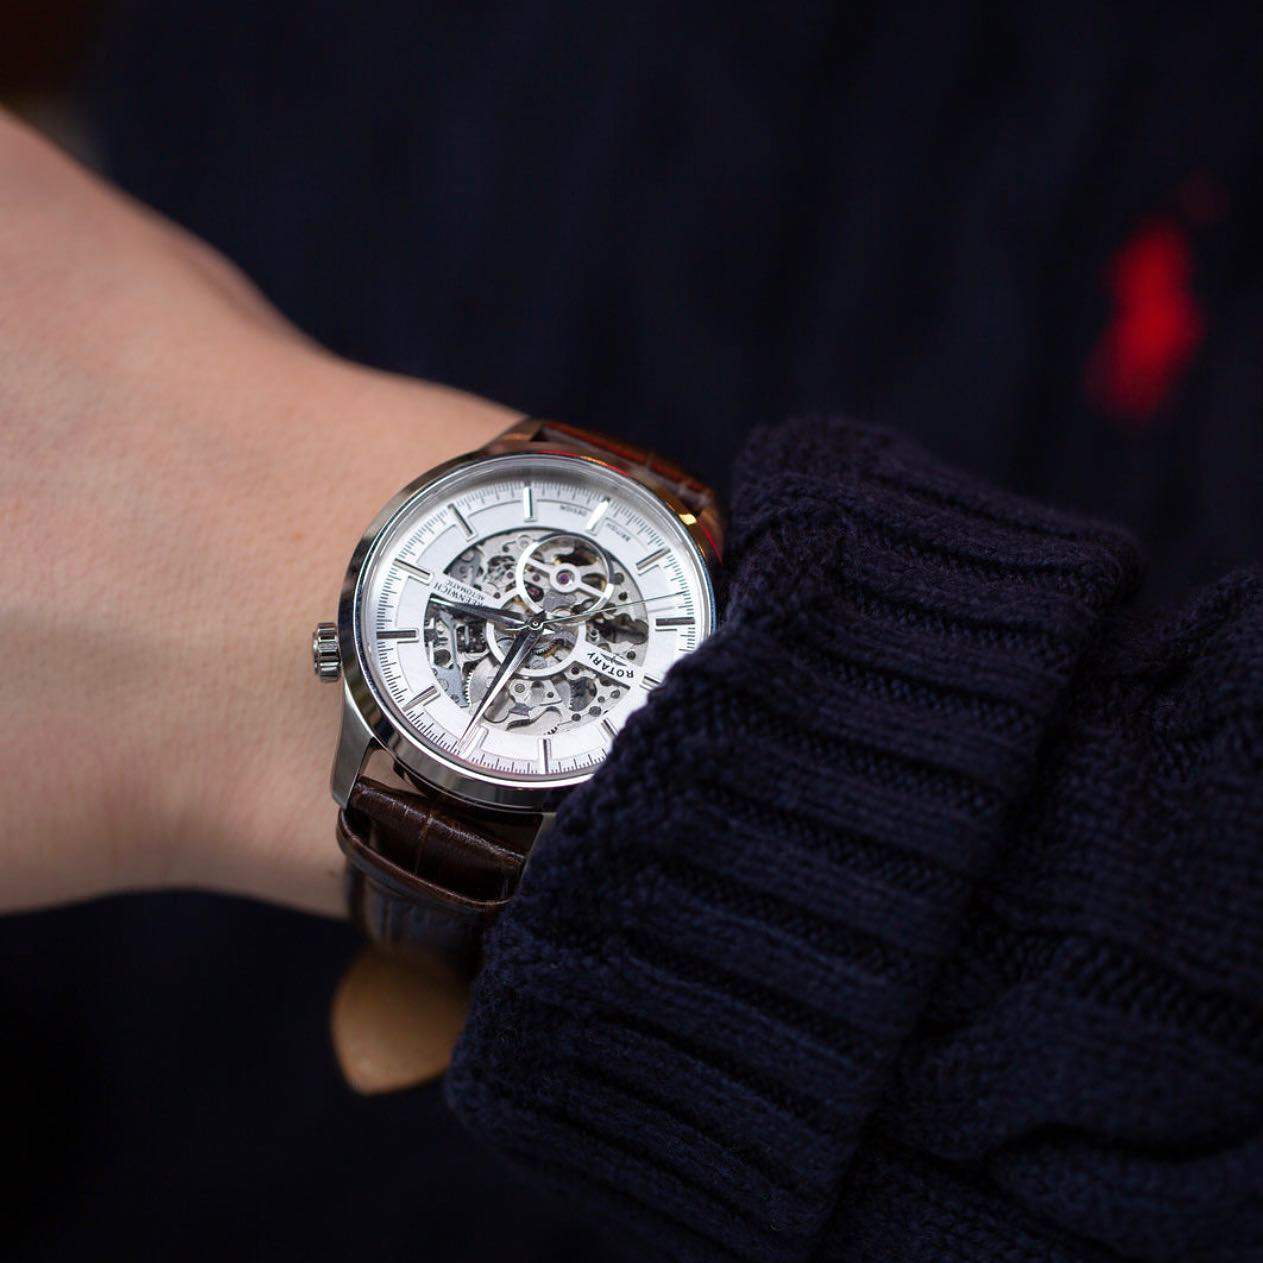 Wearing a Rotary Greenwhich Automatic Skeleton watch